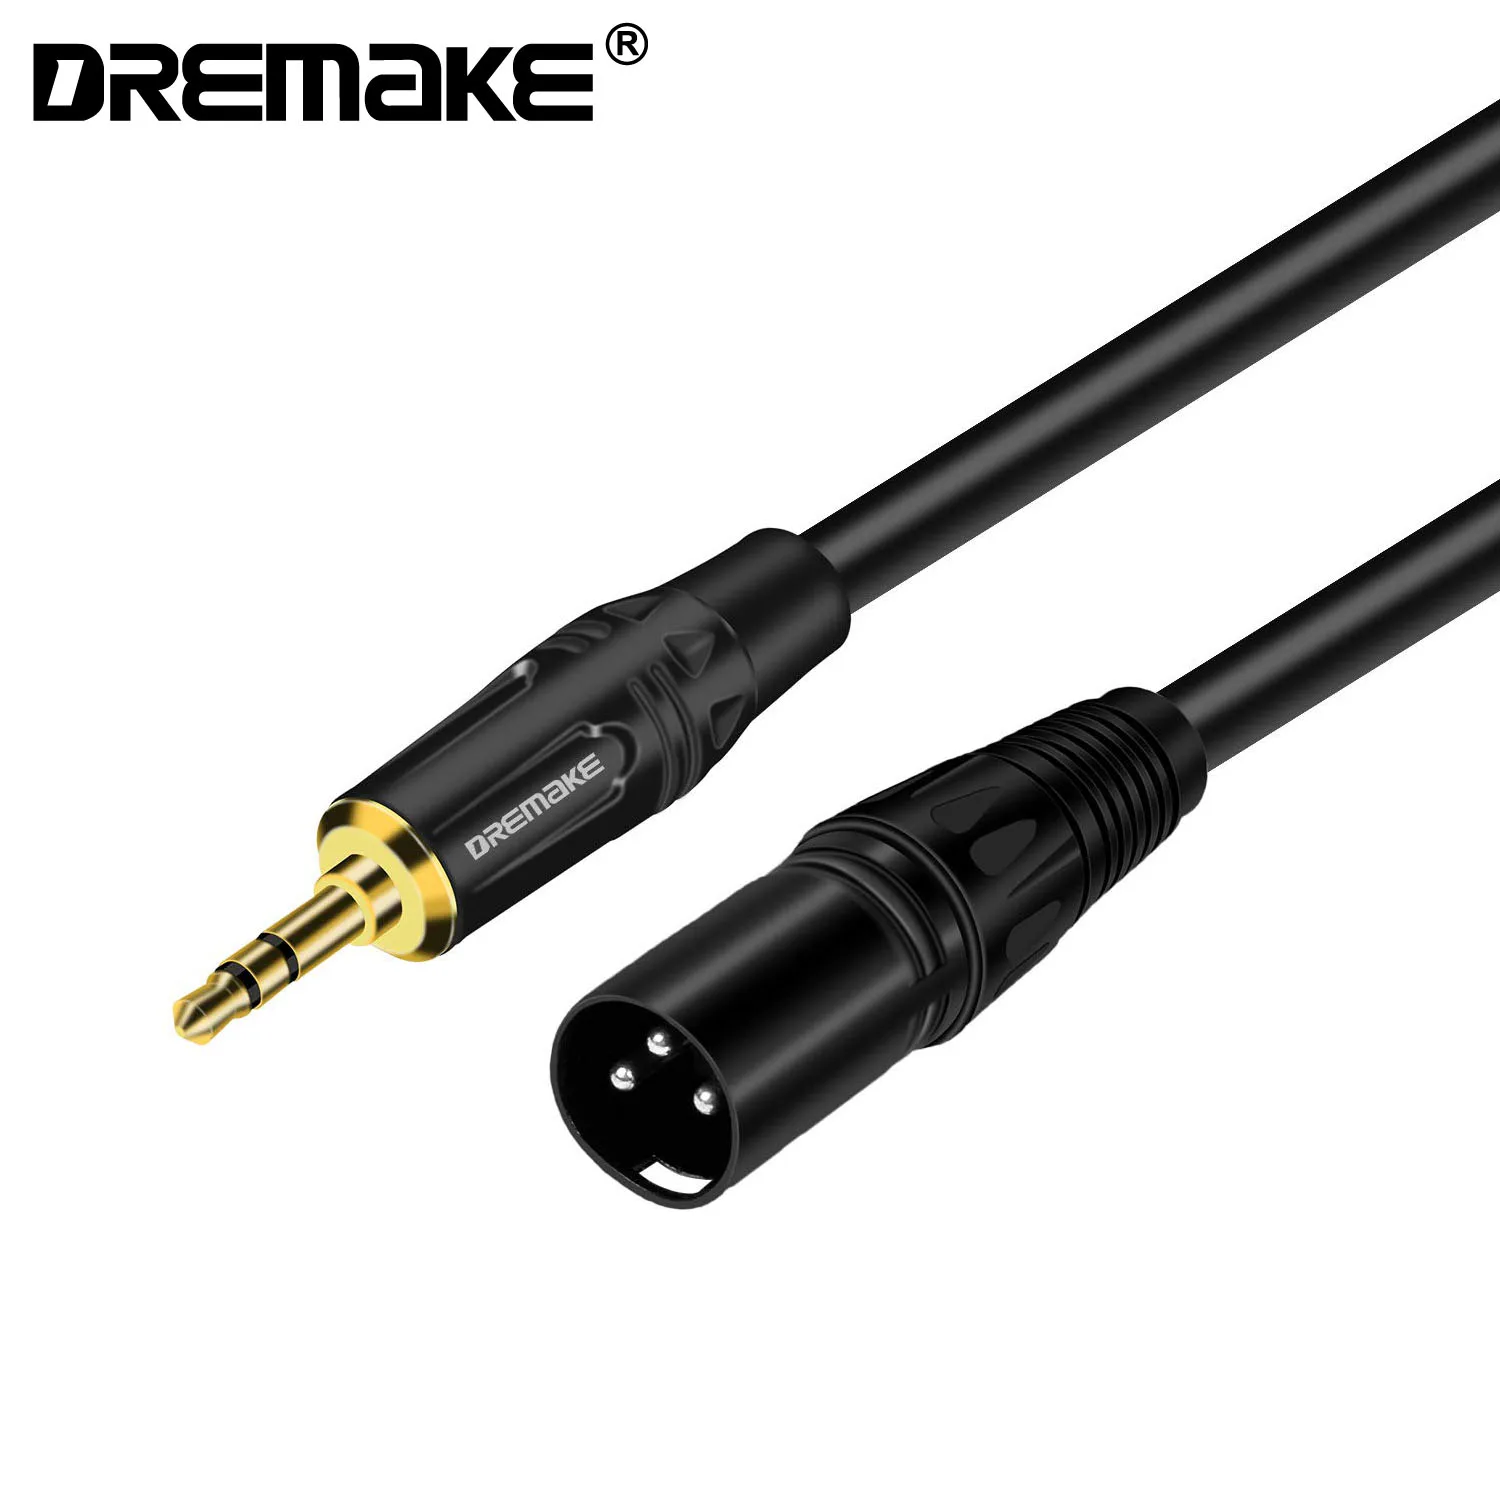 Balanced XLR Male to Jack 1/8 Inch Male Cable for Smartphones, Players, PCs, Laptop connect to Mixing Console, Amplifer, Speaker